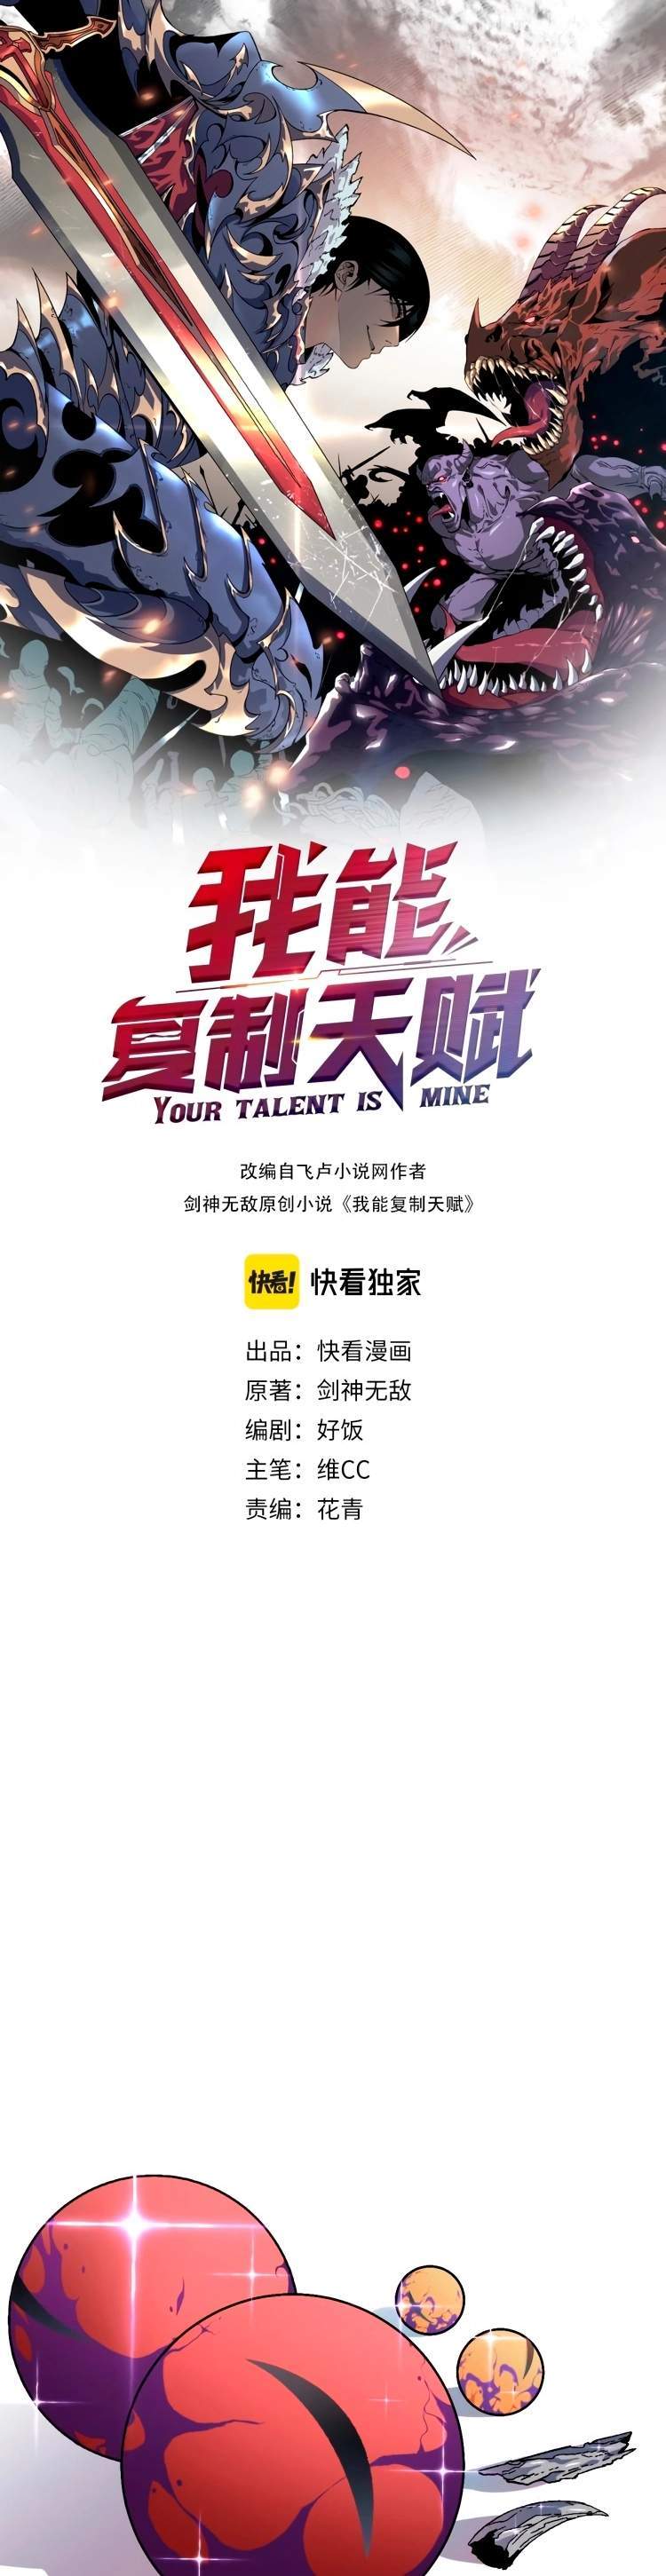 Your Talent is Mine Chapter 13